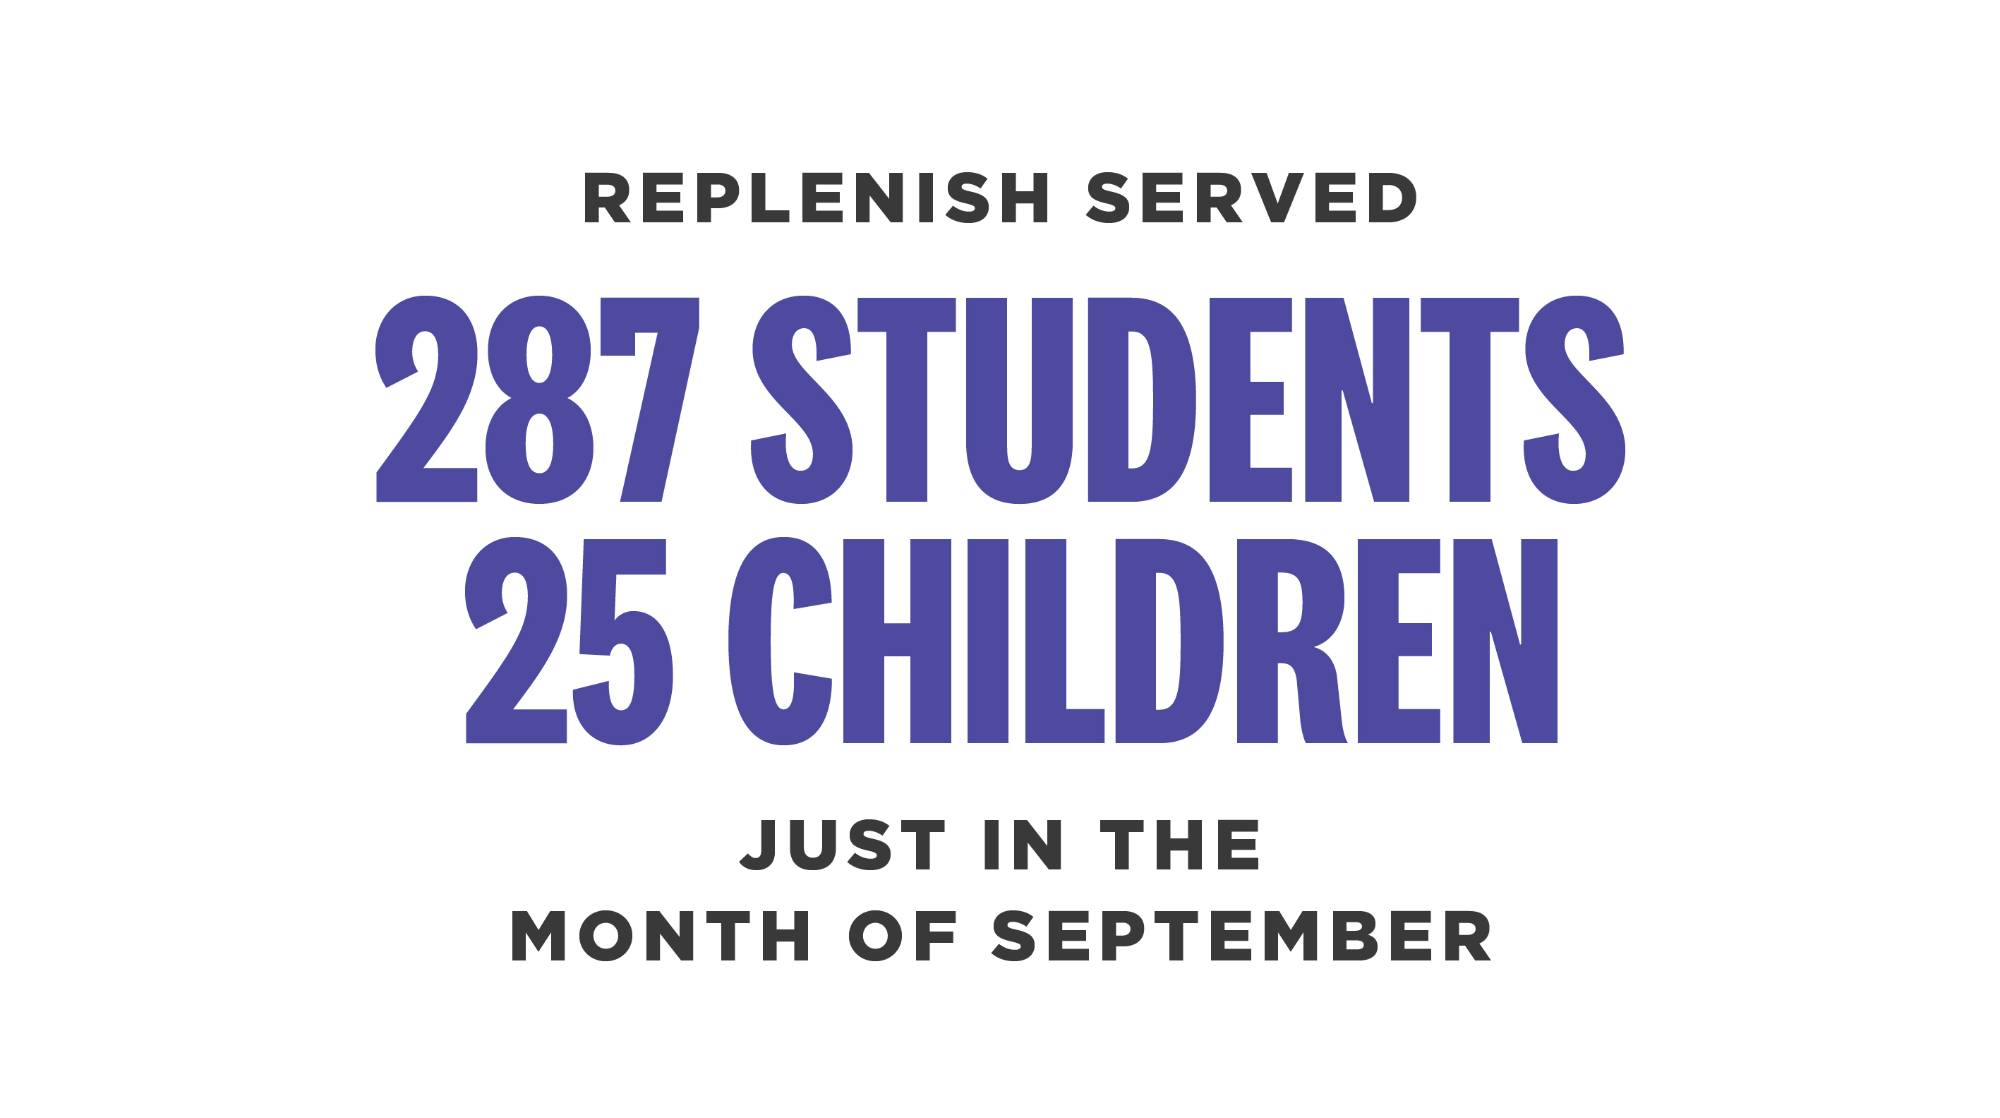 Replenish served 287 students and 25 children just in the month of September